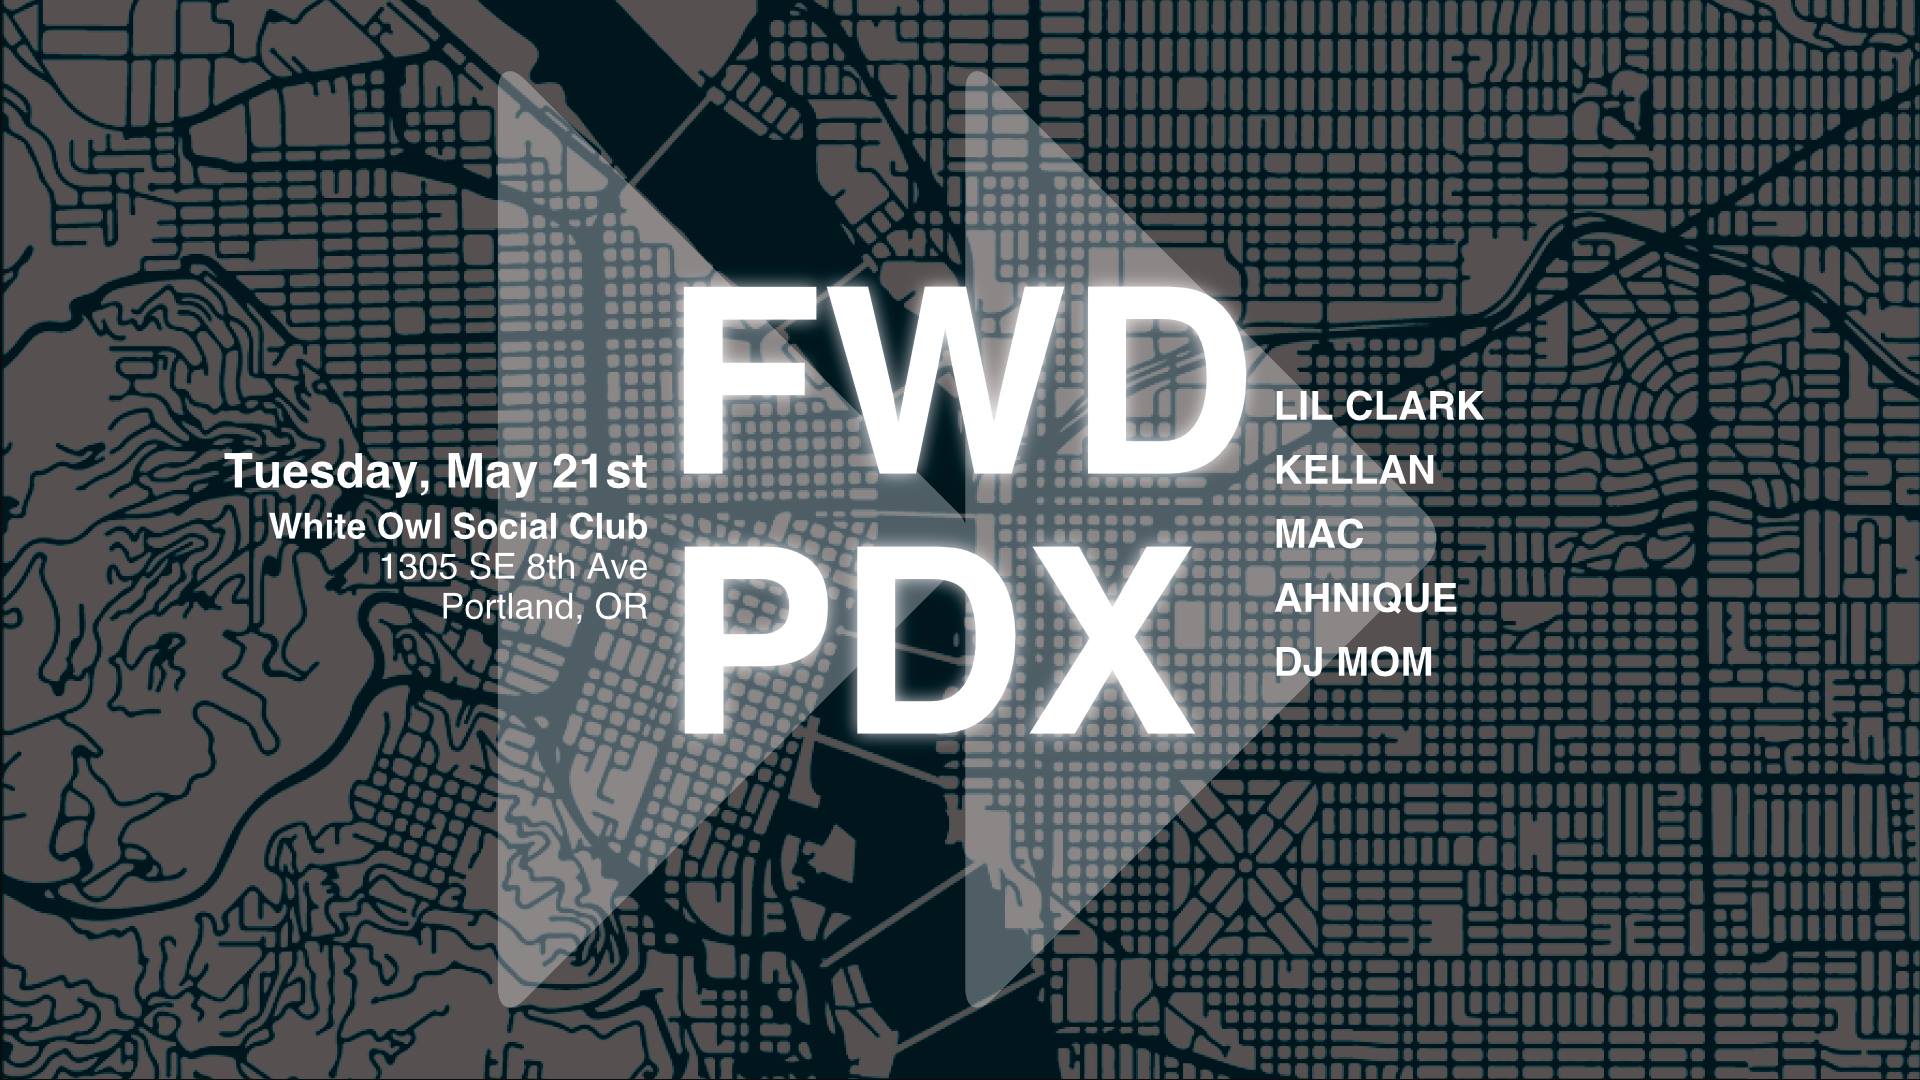 FWD PDX with AhNique